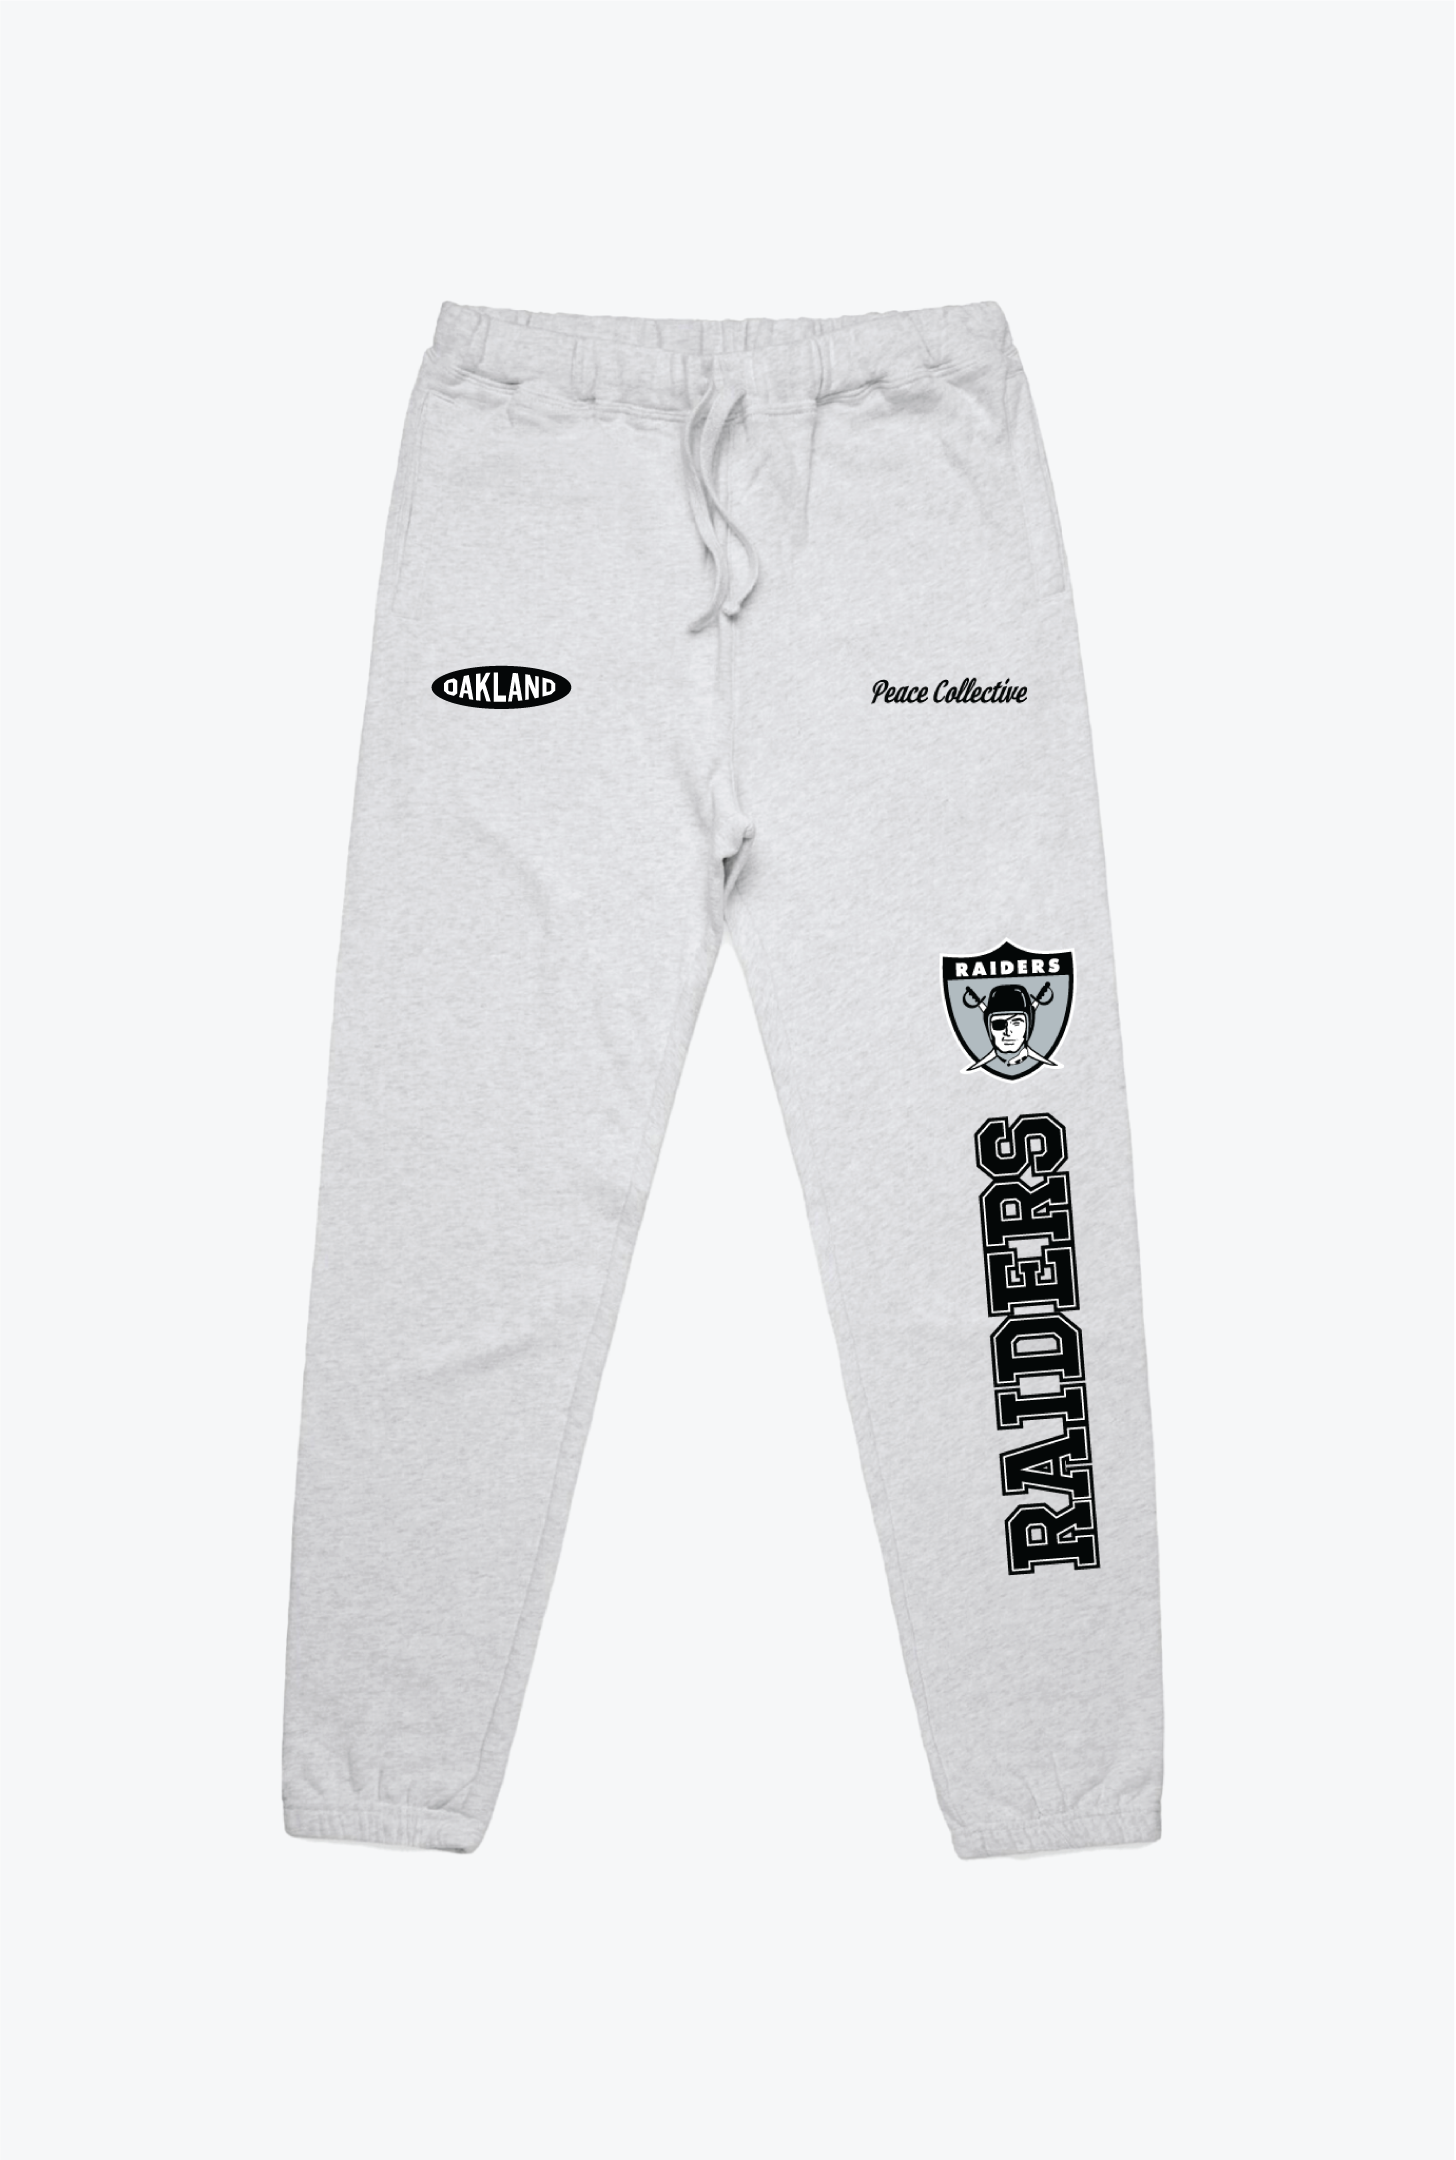 Oakland Raiders Washed Graphic Joggers - Ash